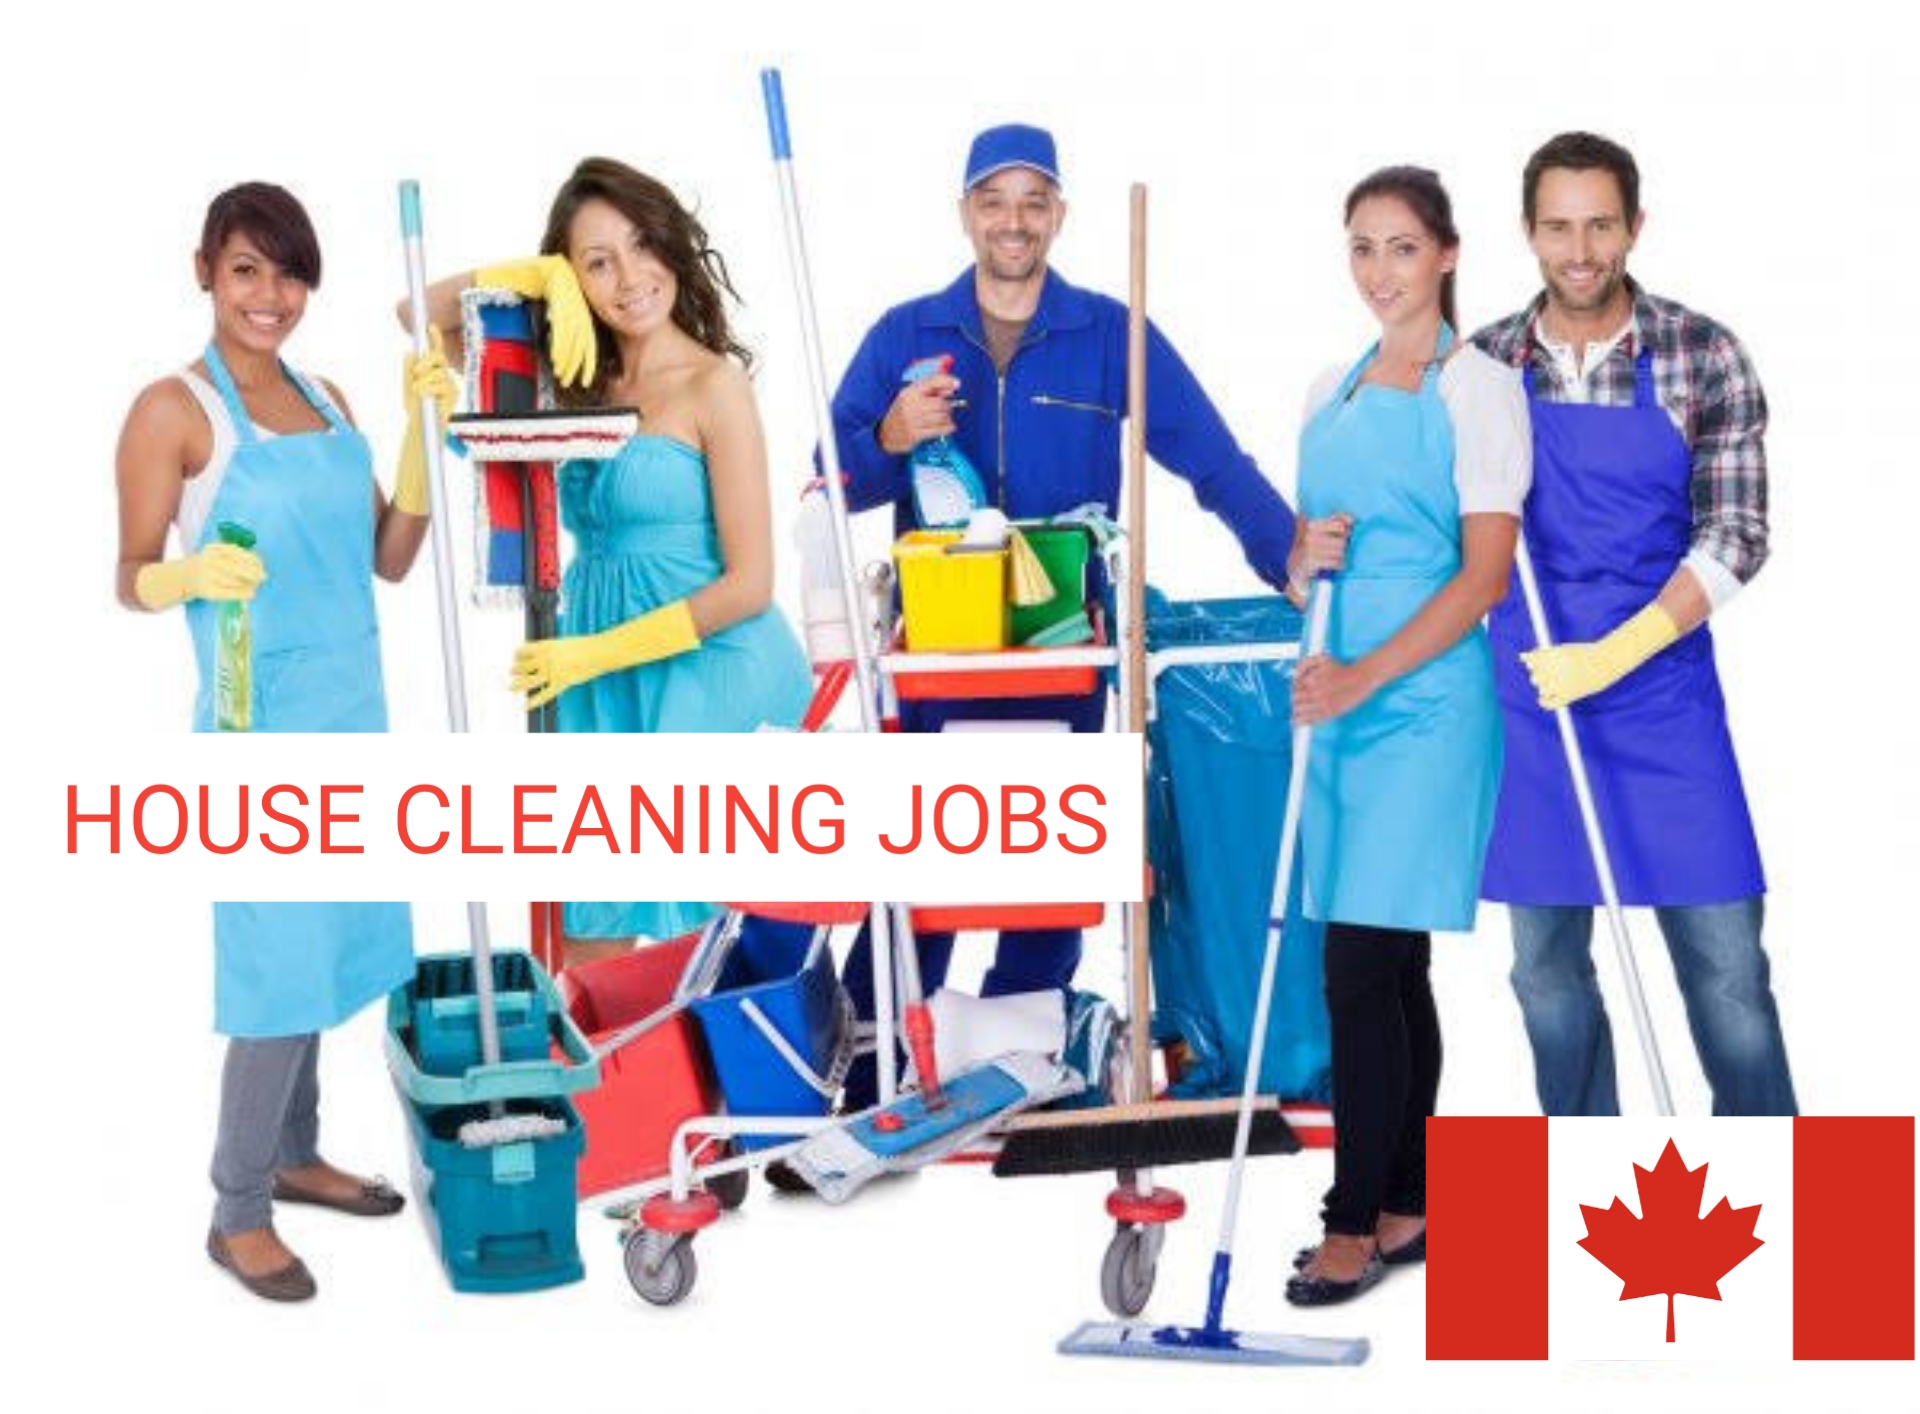 Private house cleaning jobs near me: BusinessHAB.com